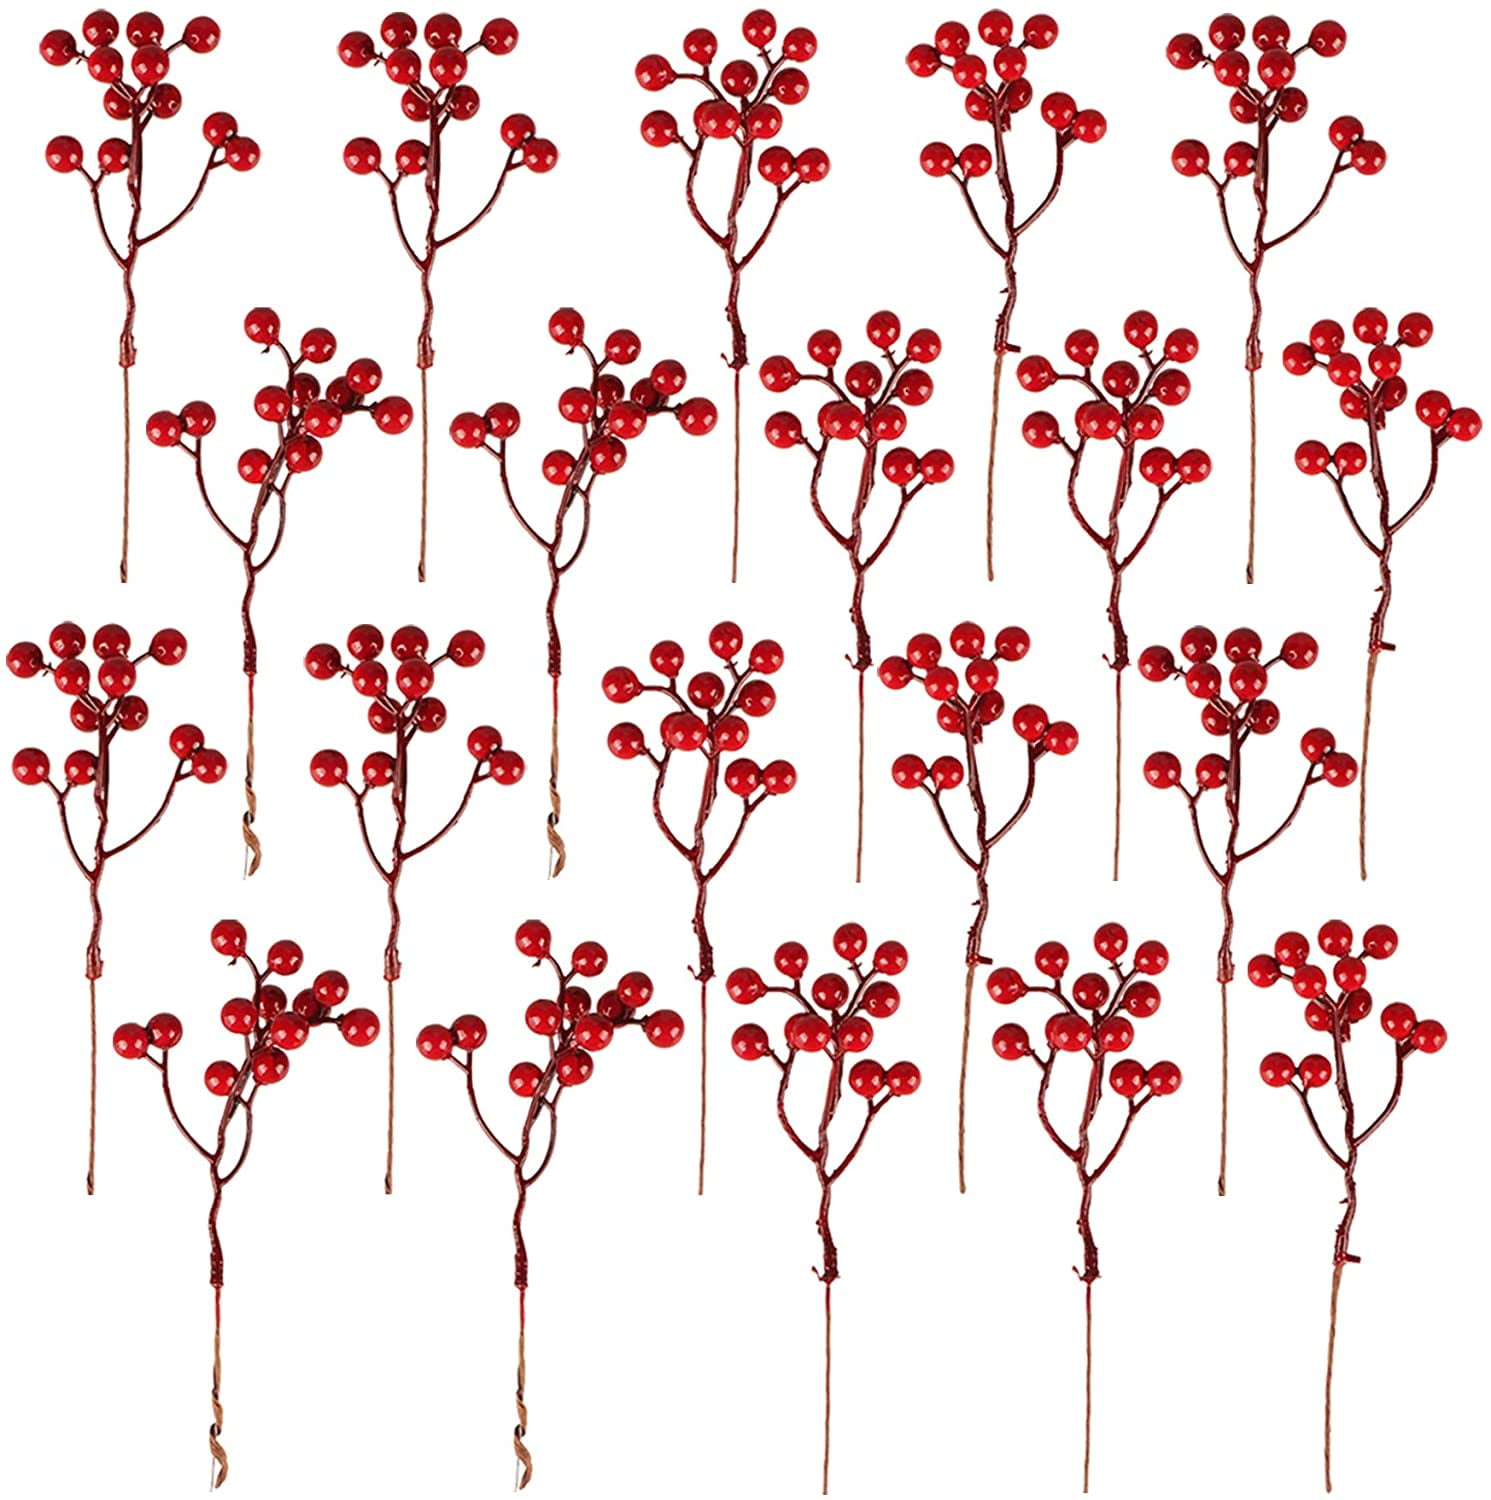 Party and Christmas Decoration FUNARTY 6pcs Artificial Red Berry Stems with Ice Holly Christmas Berries Fake Berry Sprays for Crafts Home